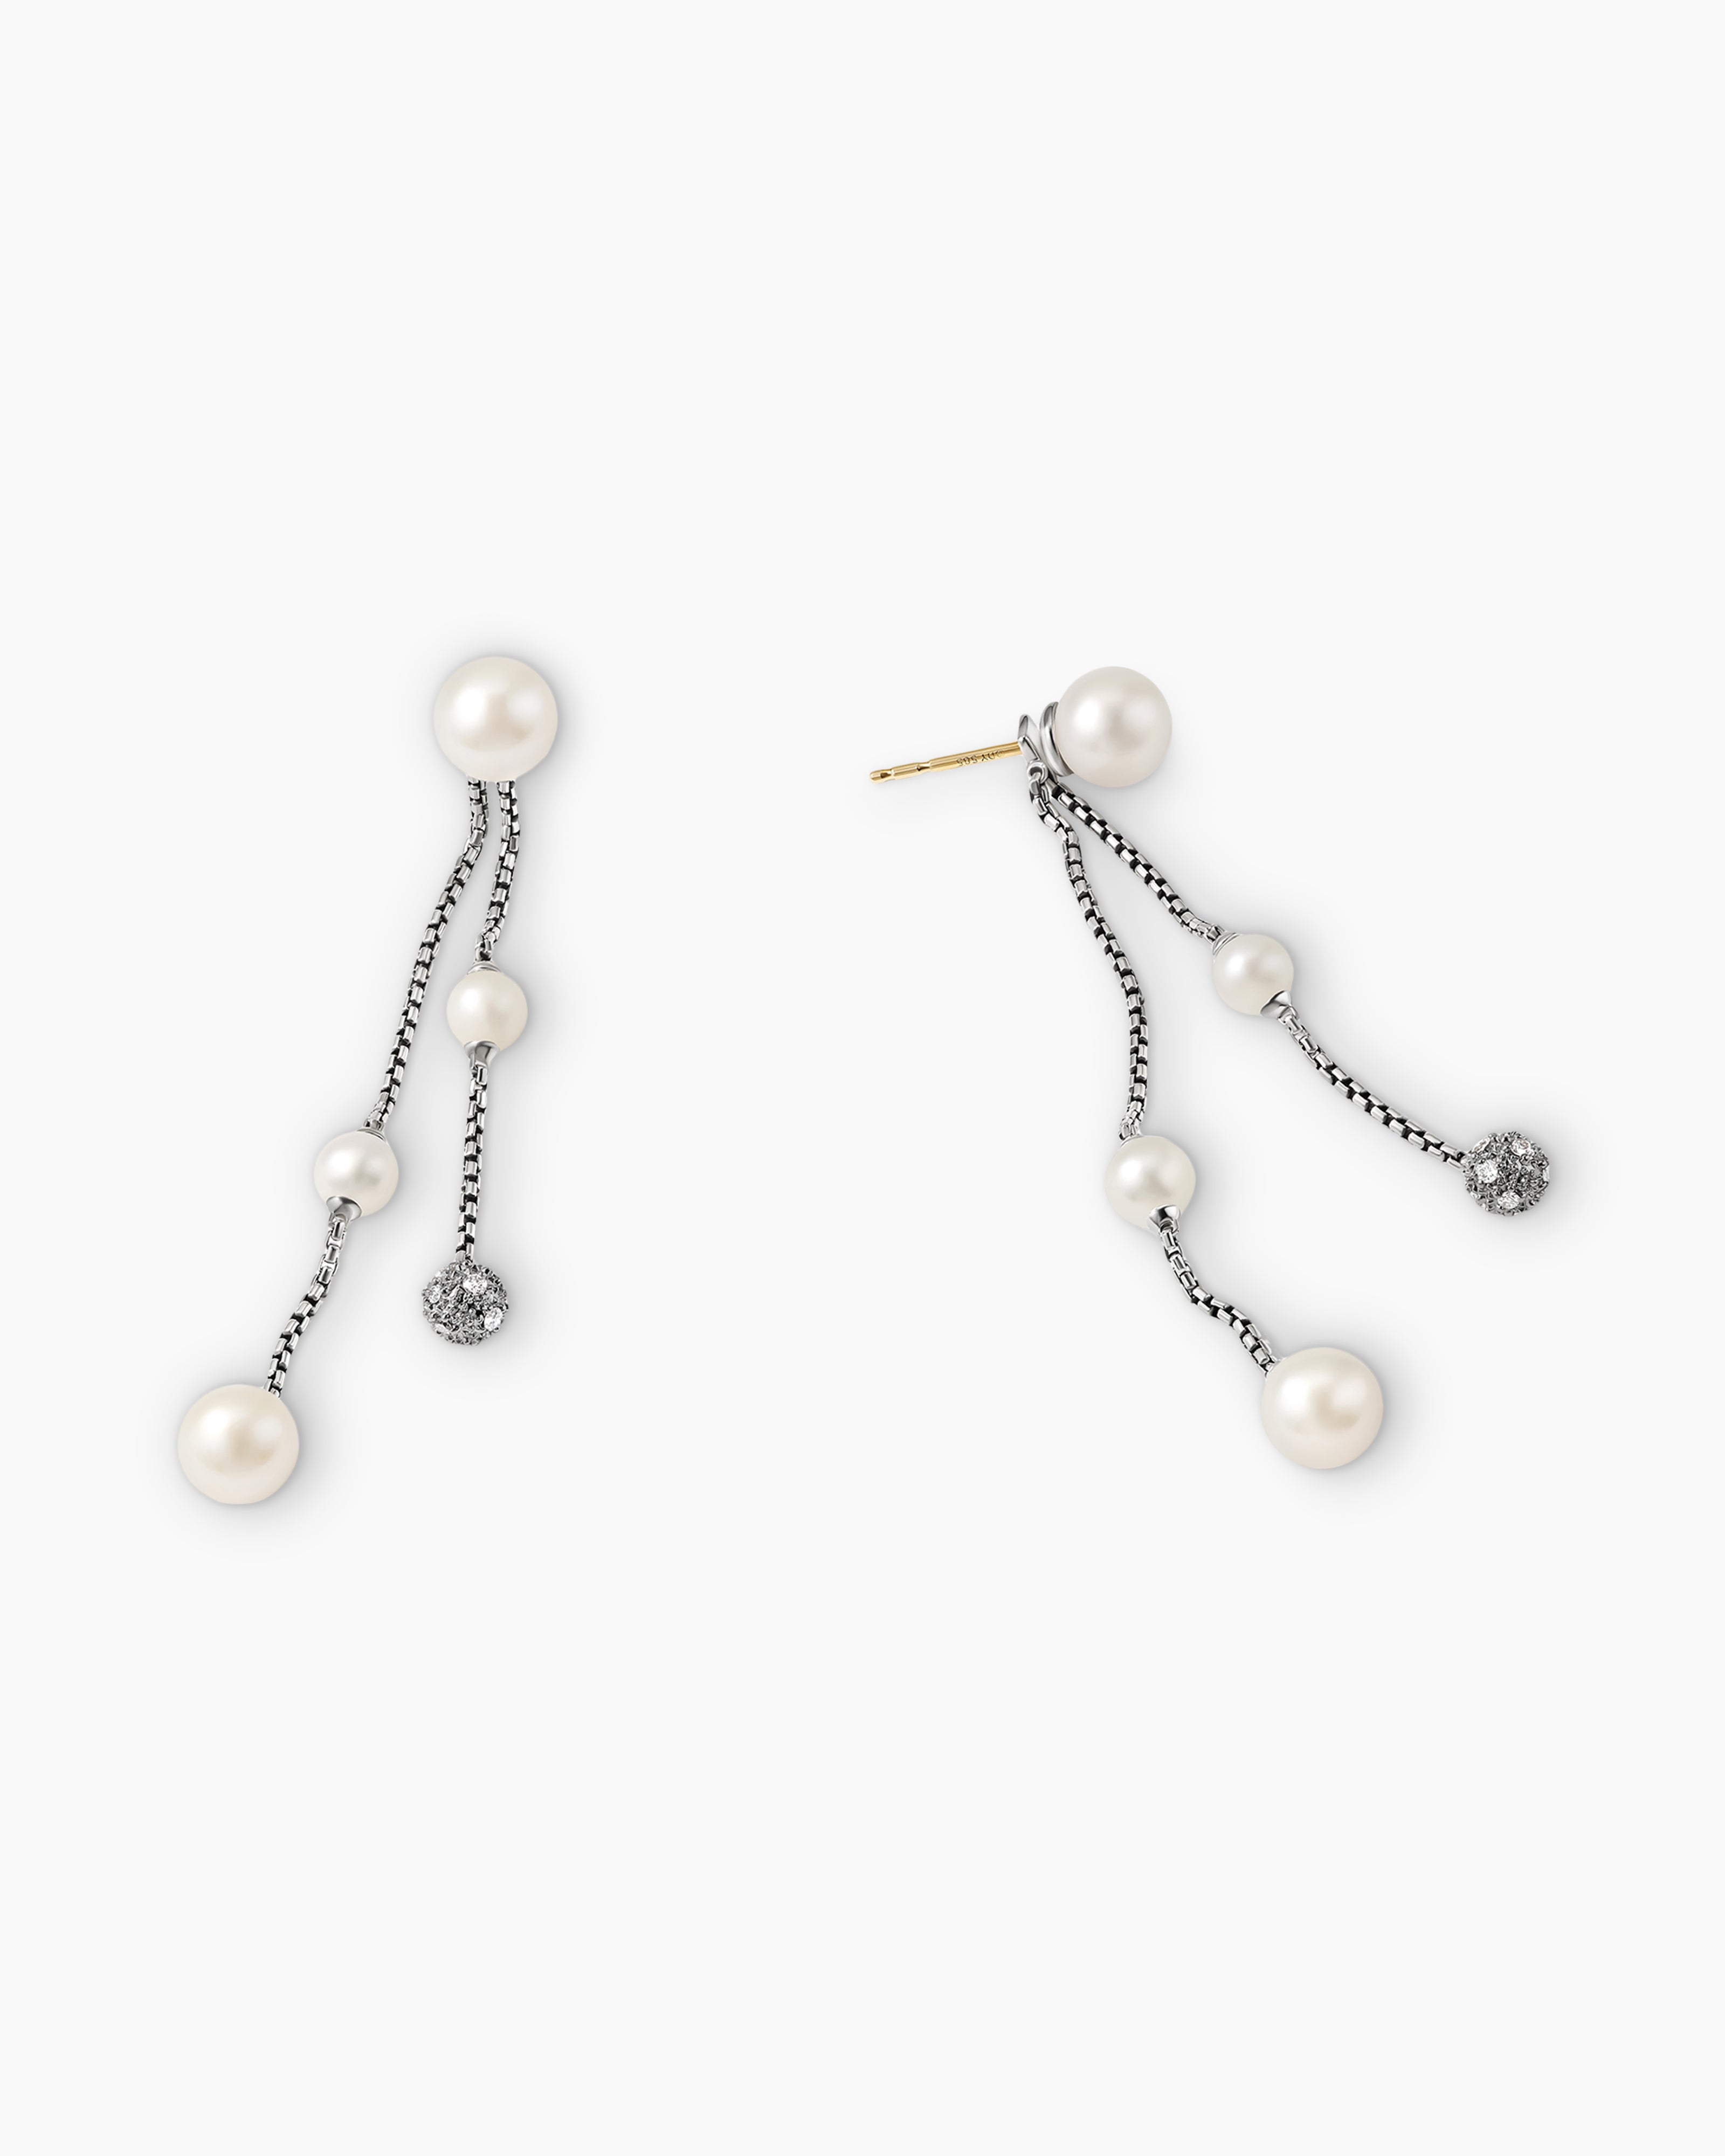 David Yurman Pearl and Pave Two Row Drop Earrings in Sterling Silver with Diamonds